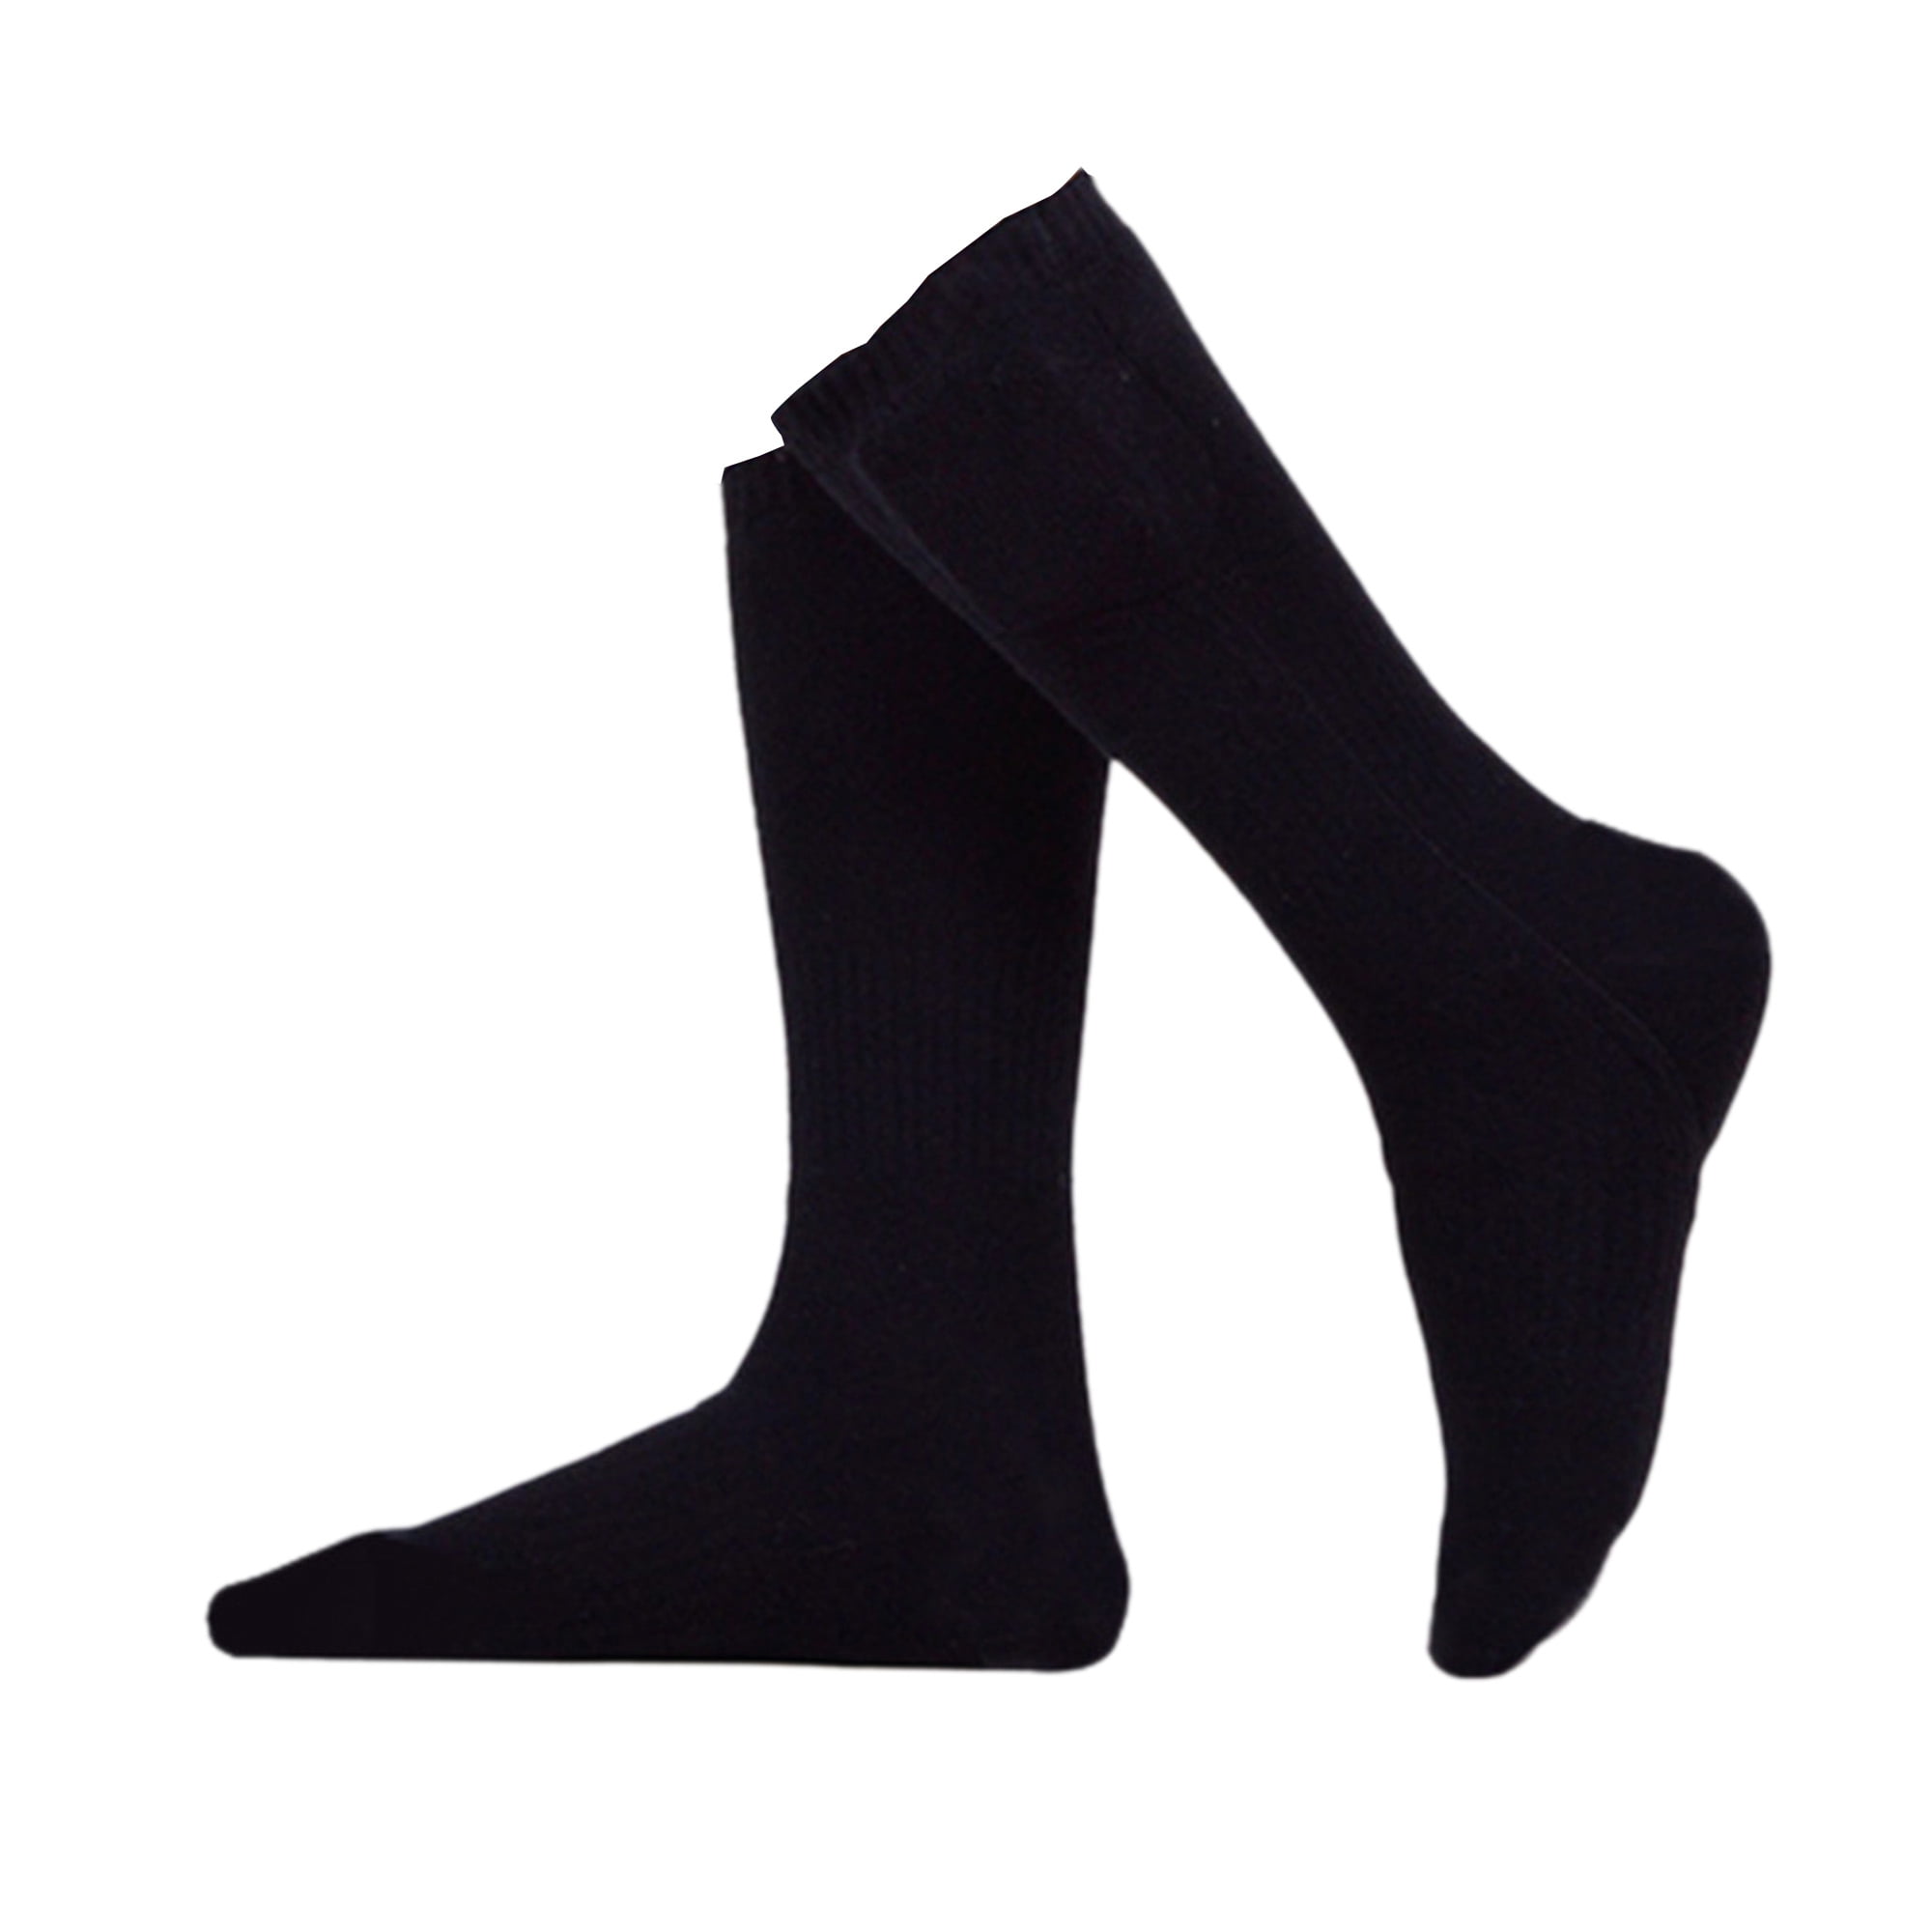 Details about   Electric Heated Socks Winter Boot Feet Warmer USB Rechargable Battery Sock H8D8 